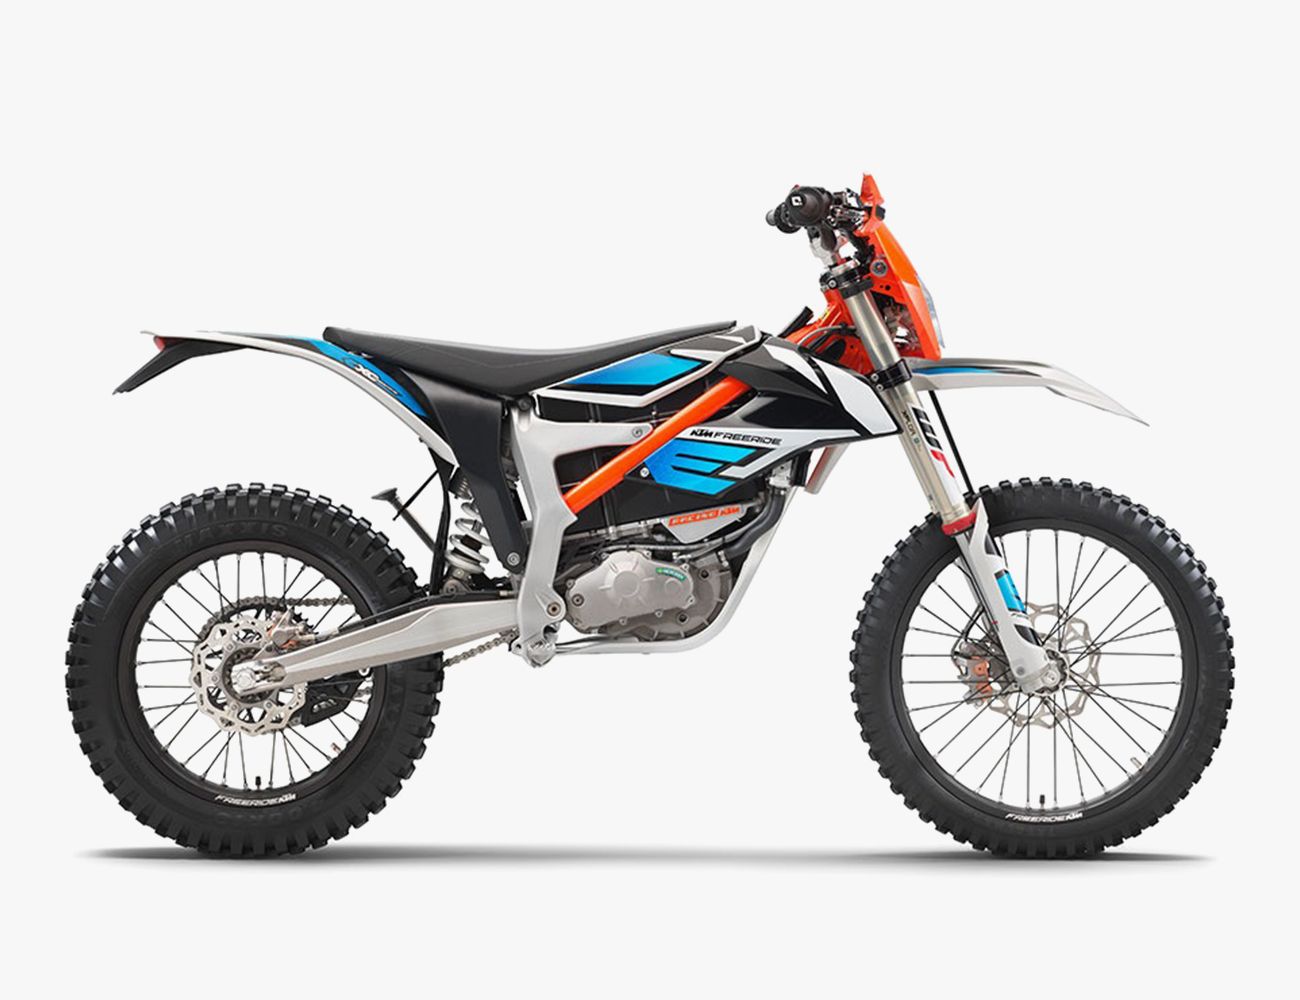 The Best Electric Dirt Bikes Zero, Cake, Segway and More